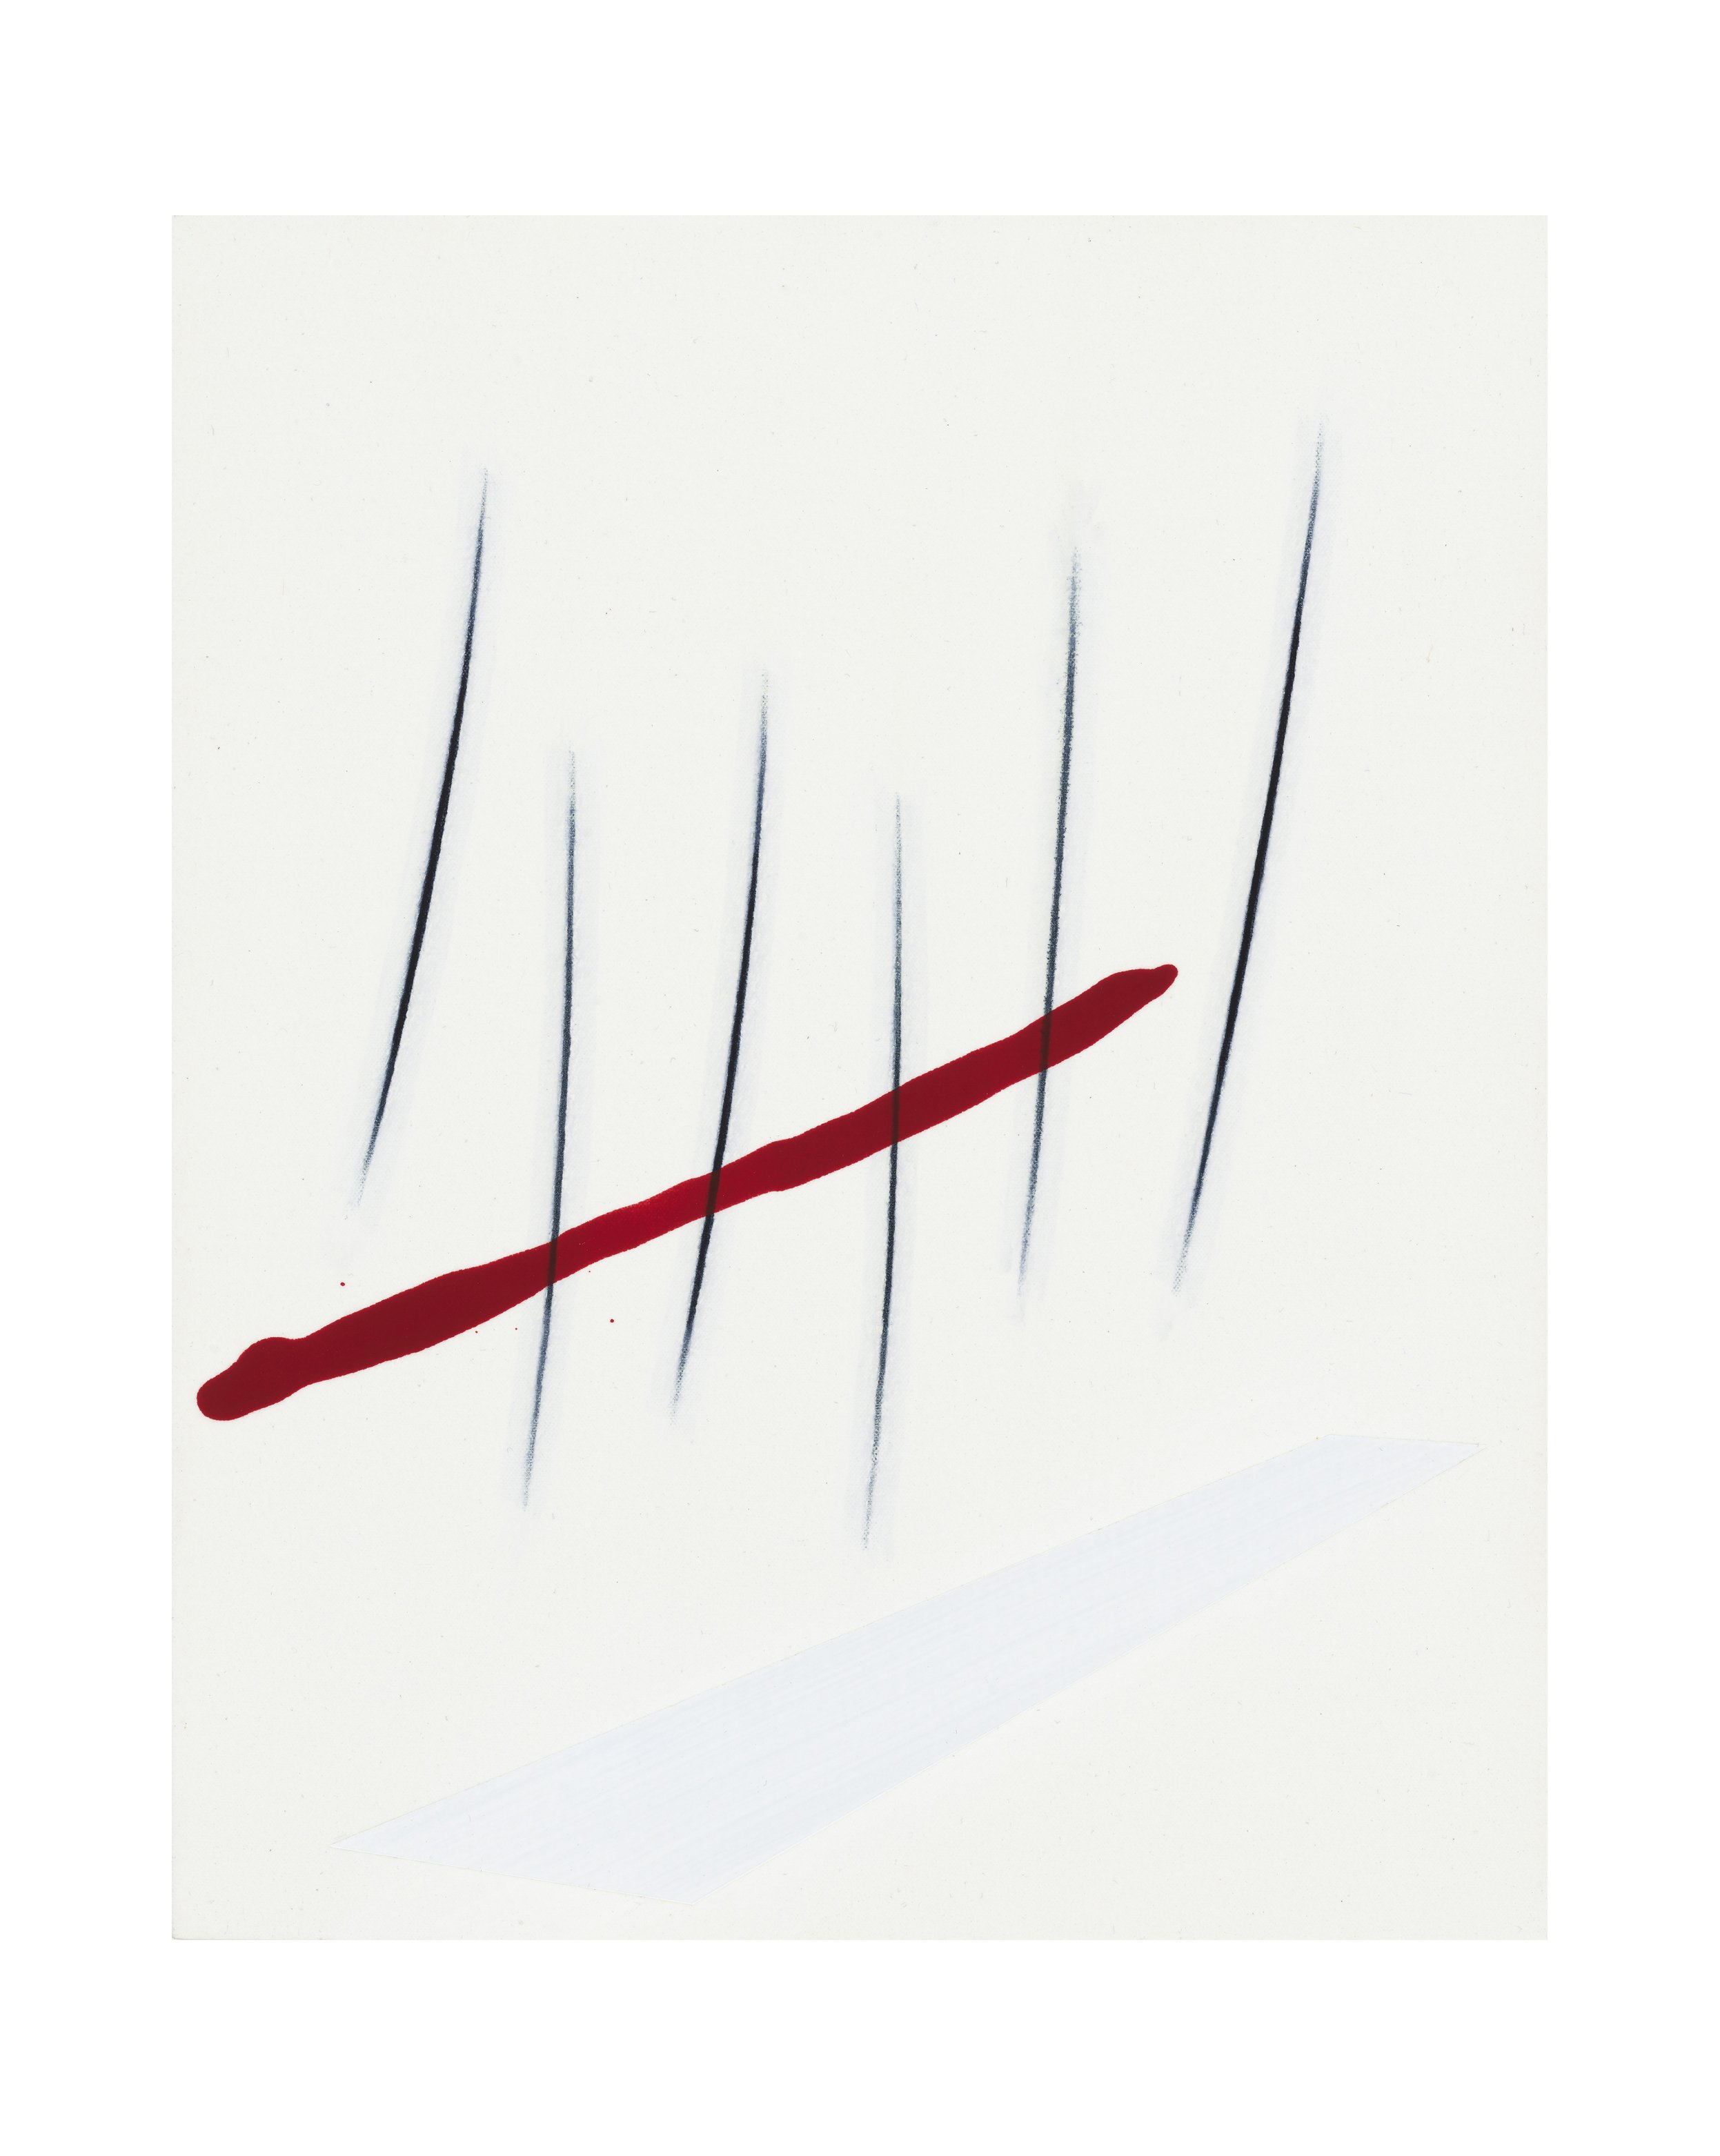   Lucio Fontana, 1965 / Concetto Spaziale, Attese   20 x 16, ink and acrylic on canvas, 2023 